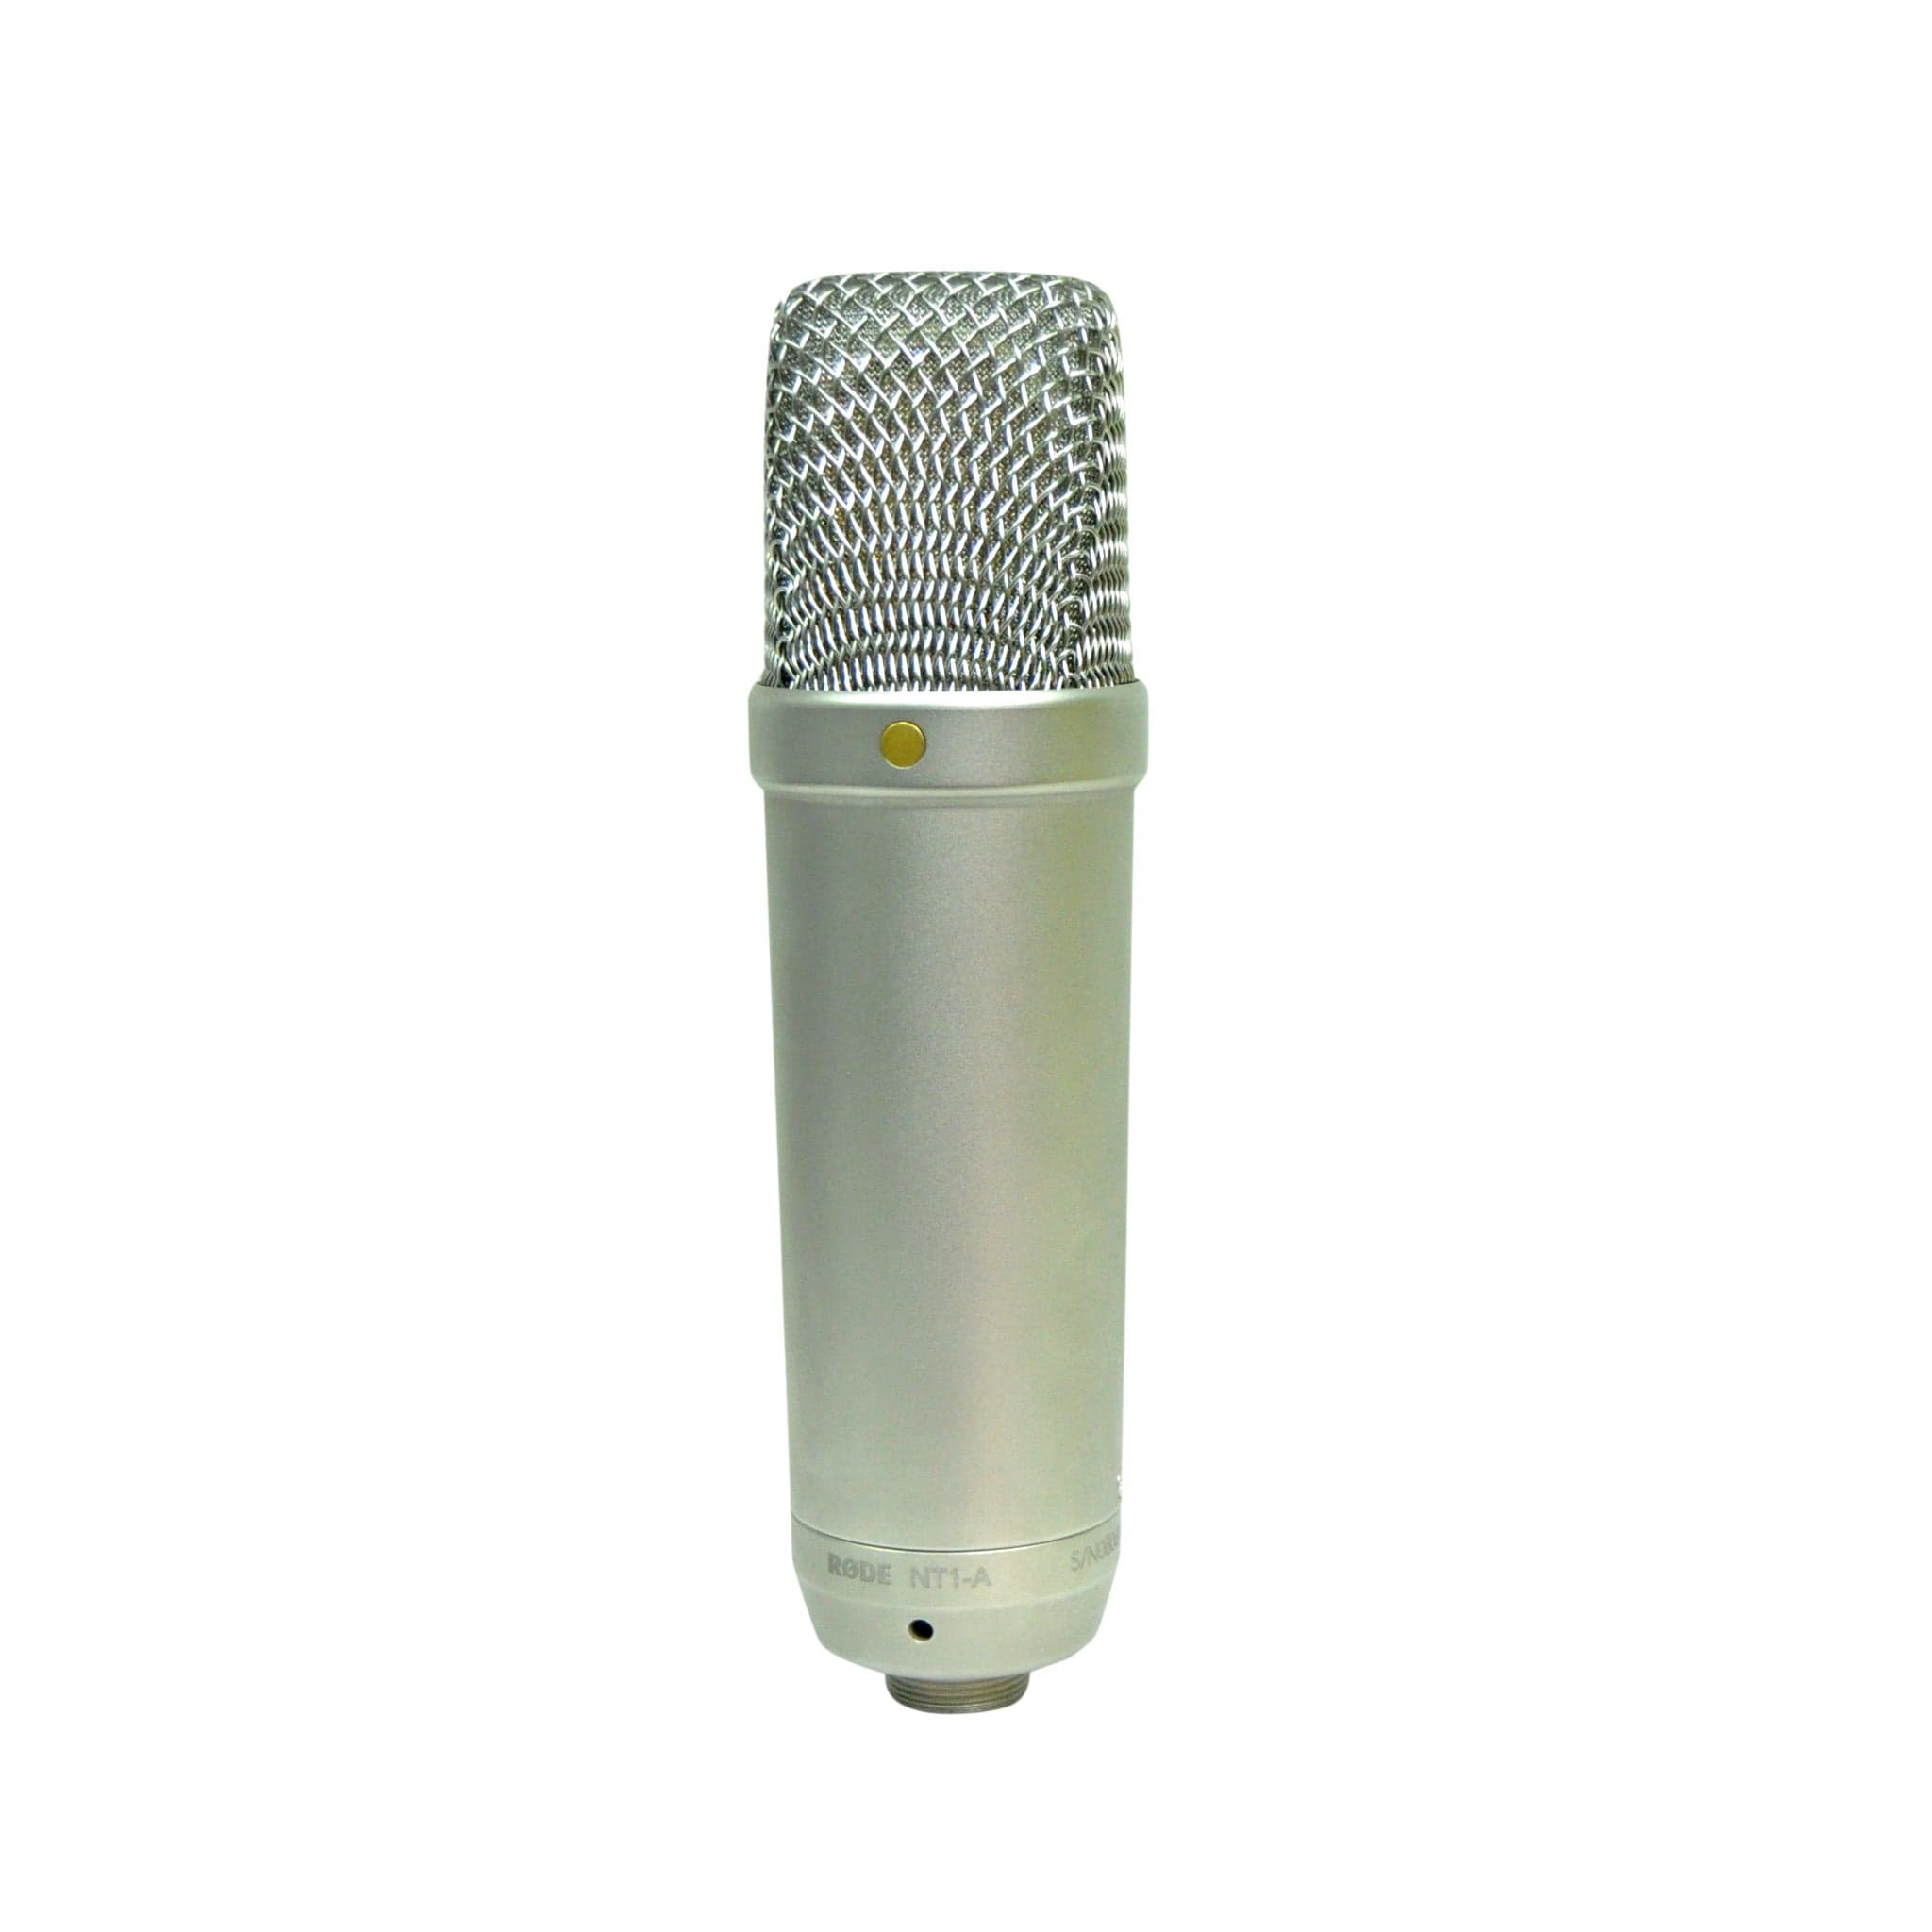 Rode NT1-A Large-diaphragm Cardioid Condenser Microphone